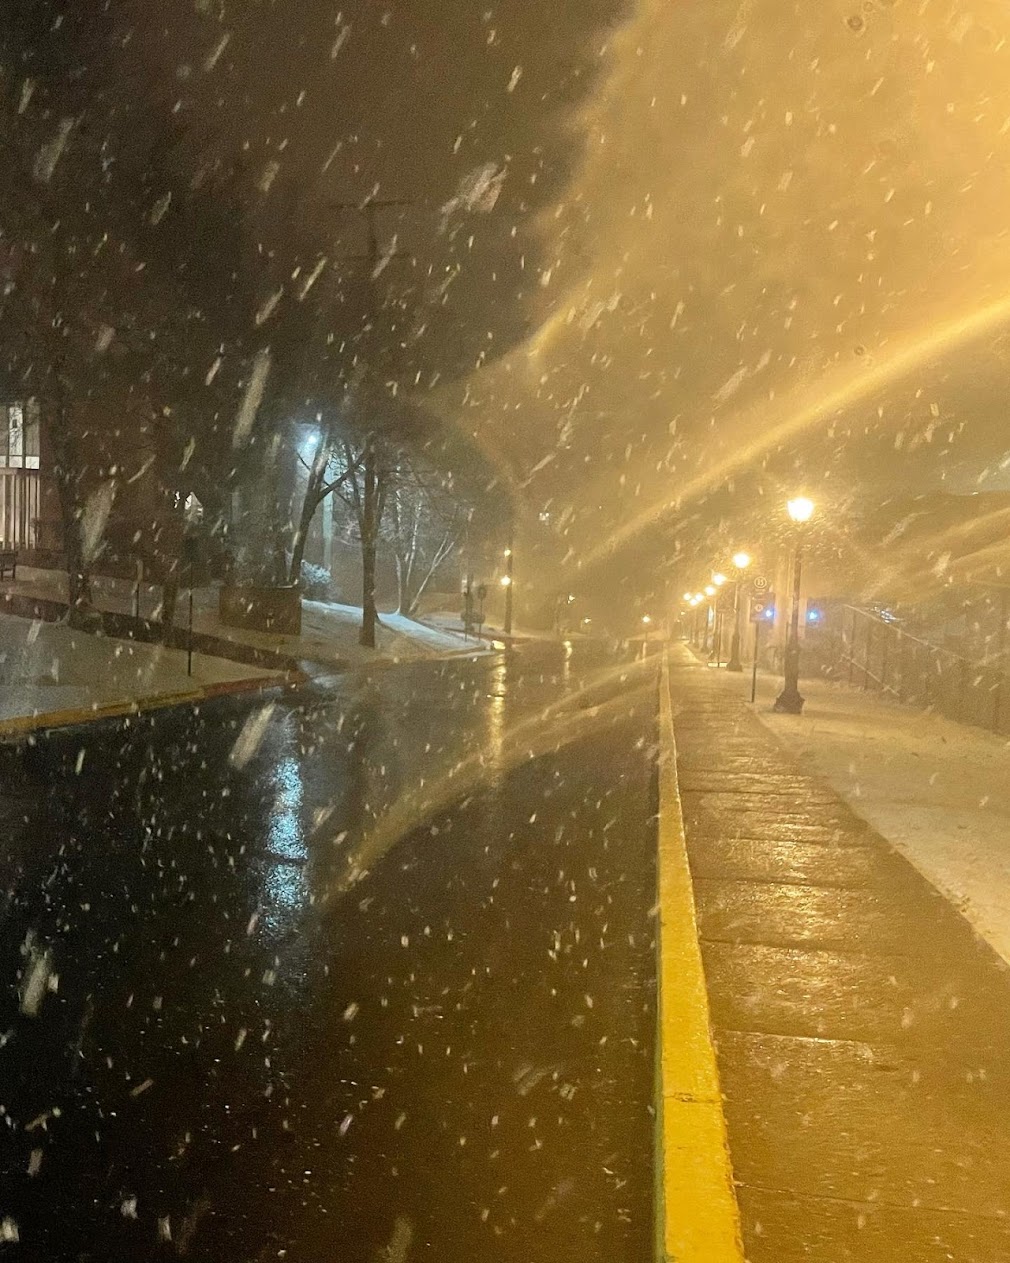 A blurry photo of a street. There is snow falling from the sky.